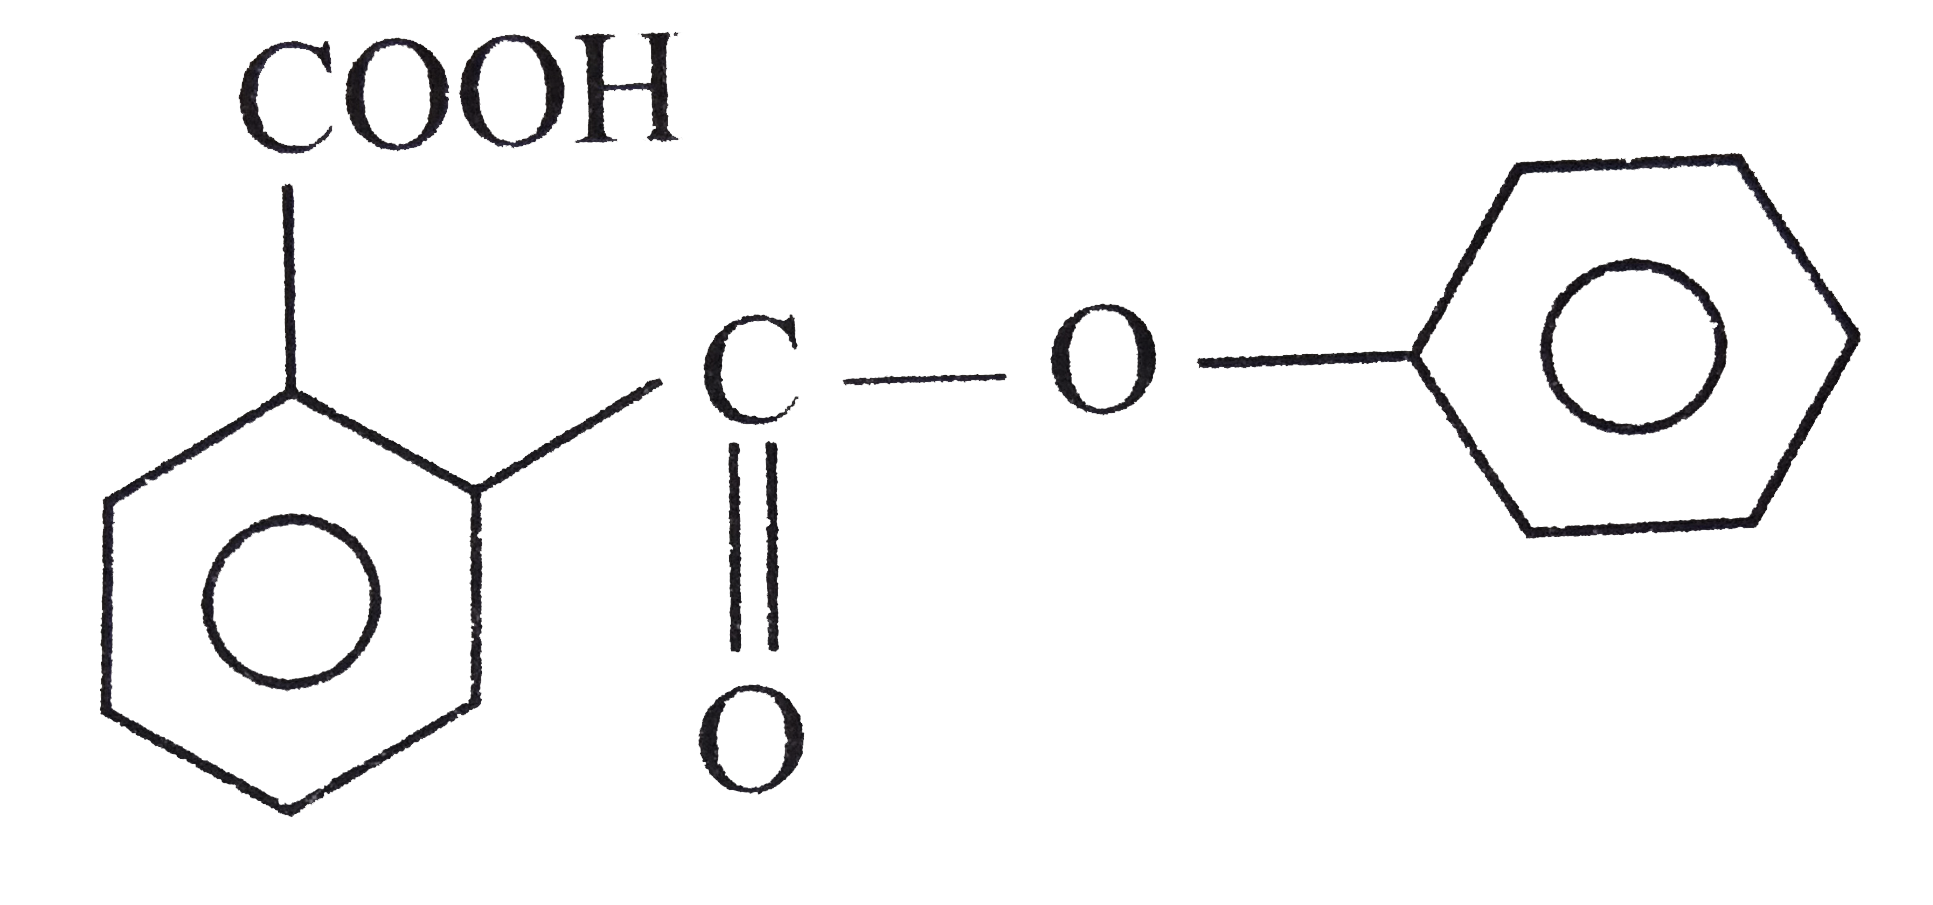 The correct IUPAC name of the compound